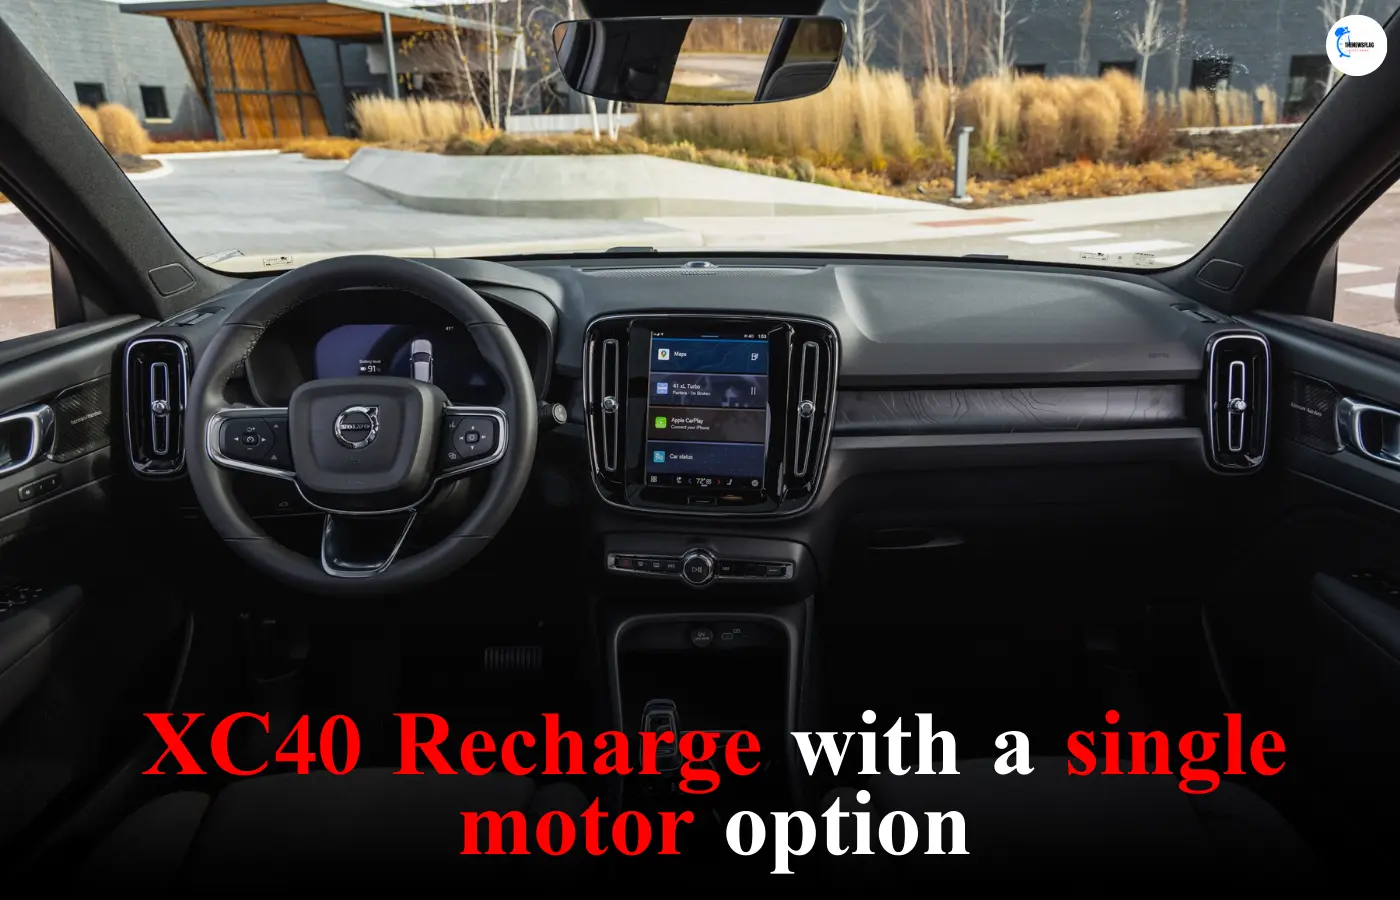 XC40 Recharge with a single motor option